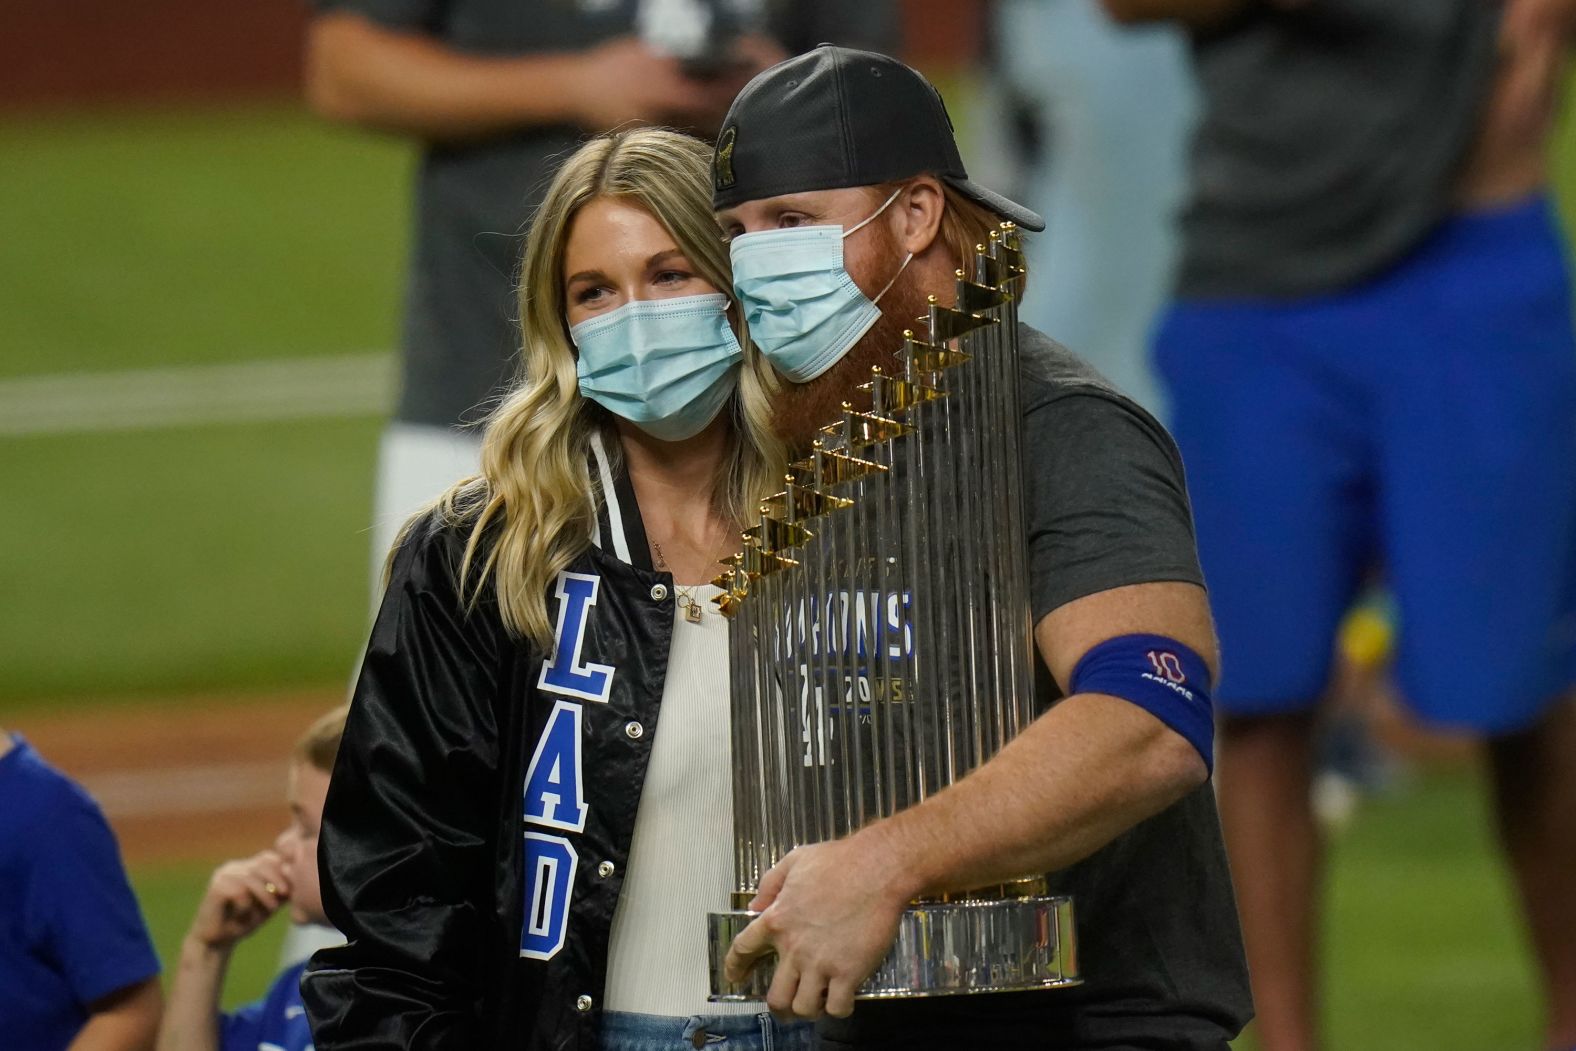 Dodgers third baseman Justin Turner celebrates with the trophy. He had to be pulled in the middle of Game 6 <a href="index.php?page=&url=https%3A%2F%2Fwww.cnn.com%2F2020%2F10%2F28%2Fsport%2Fjustin-turner-coronavirus-los-angeles-dodgers-world-series-spt-intl%2Findex.html" target="_blank">after testing positive for Covid-19.</a> He returned to the field for the postgame celebrations.